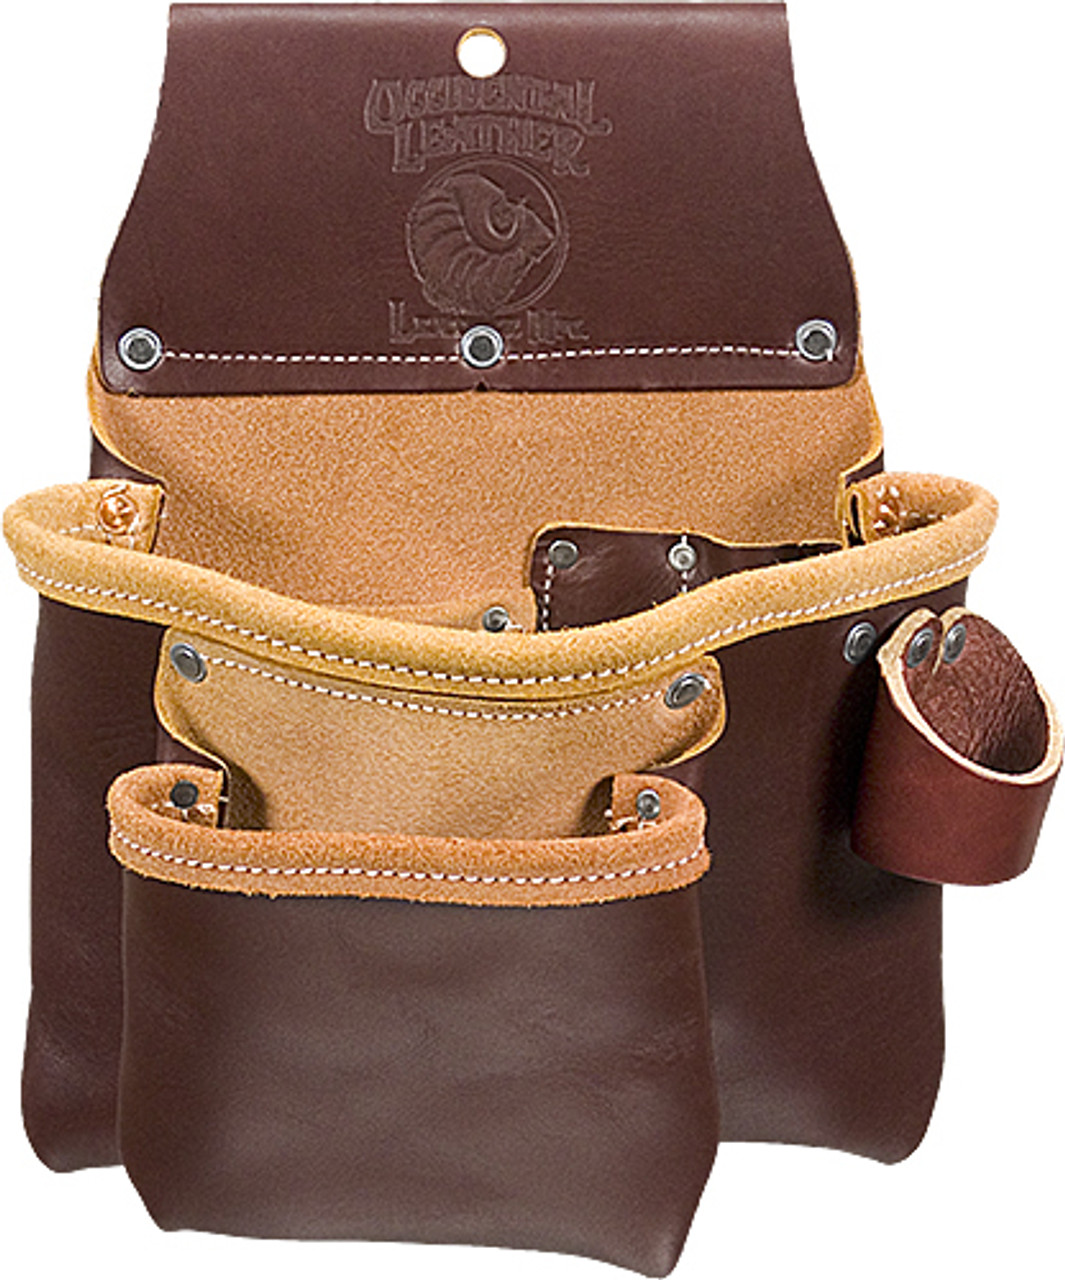 Occidental Leather 5017DB Pouch Pro Tool